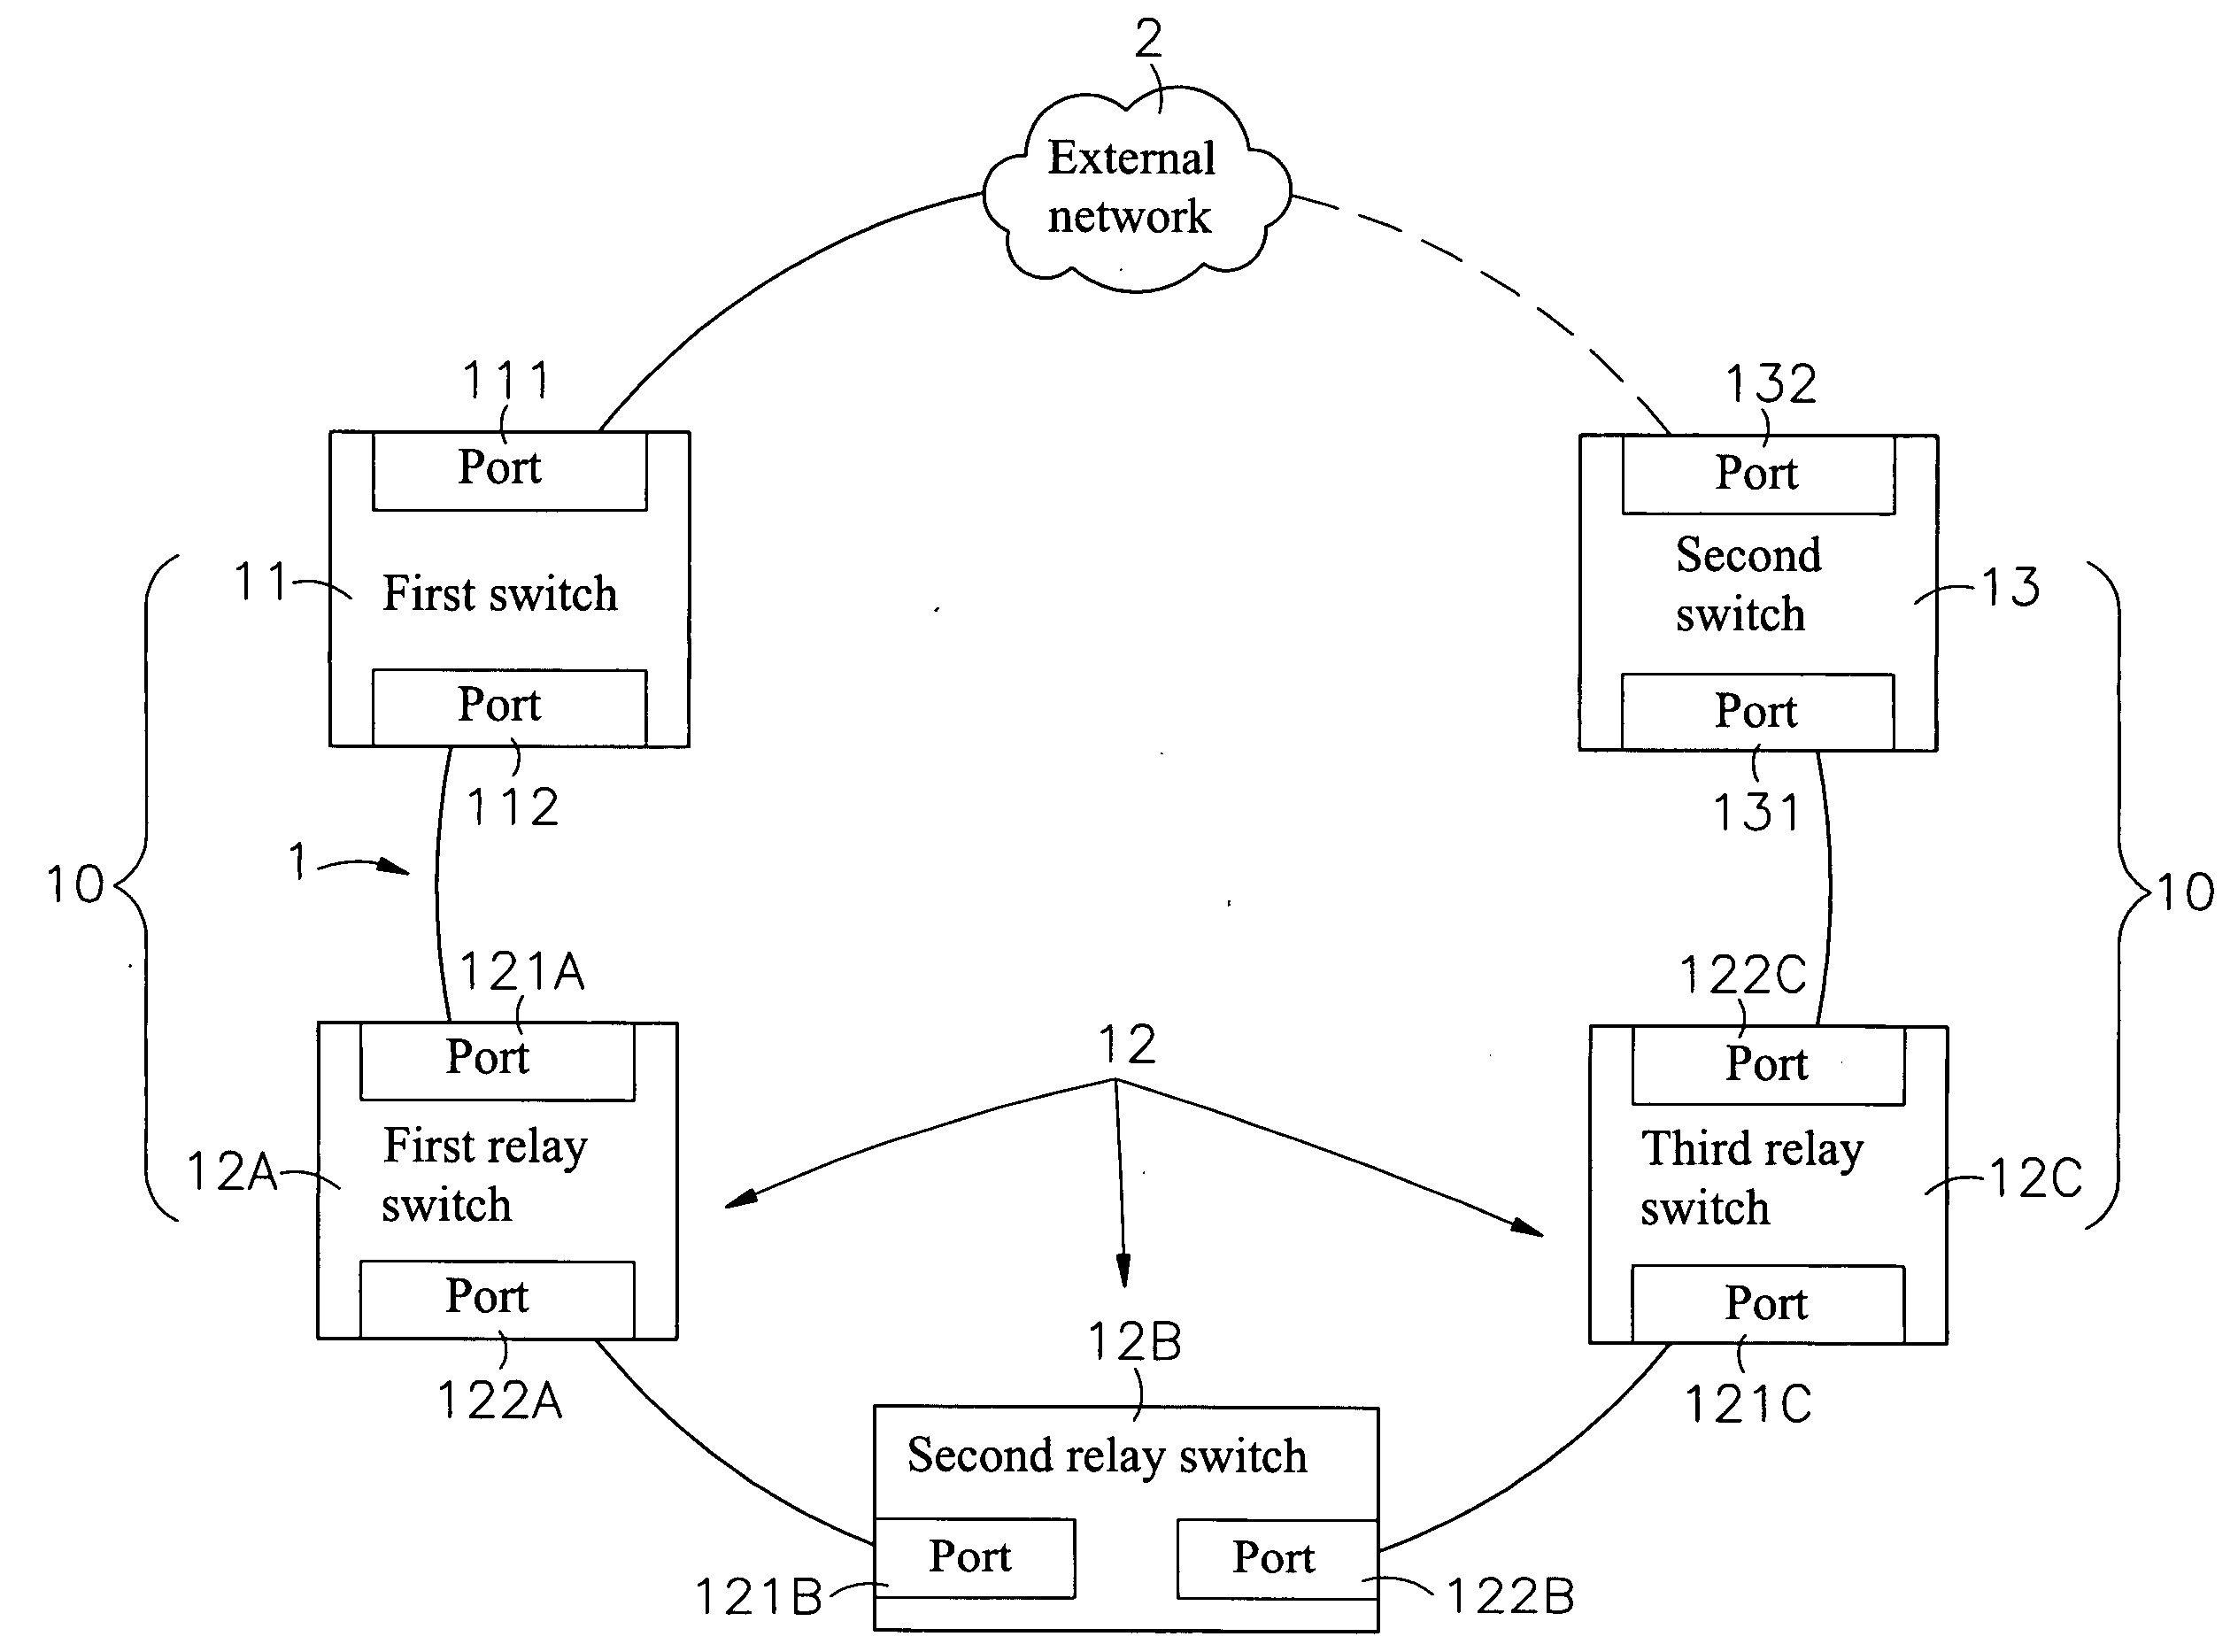 Method for Conducting Redundancy Checks in a Chain Network